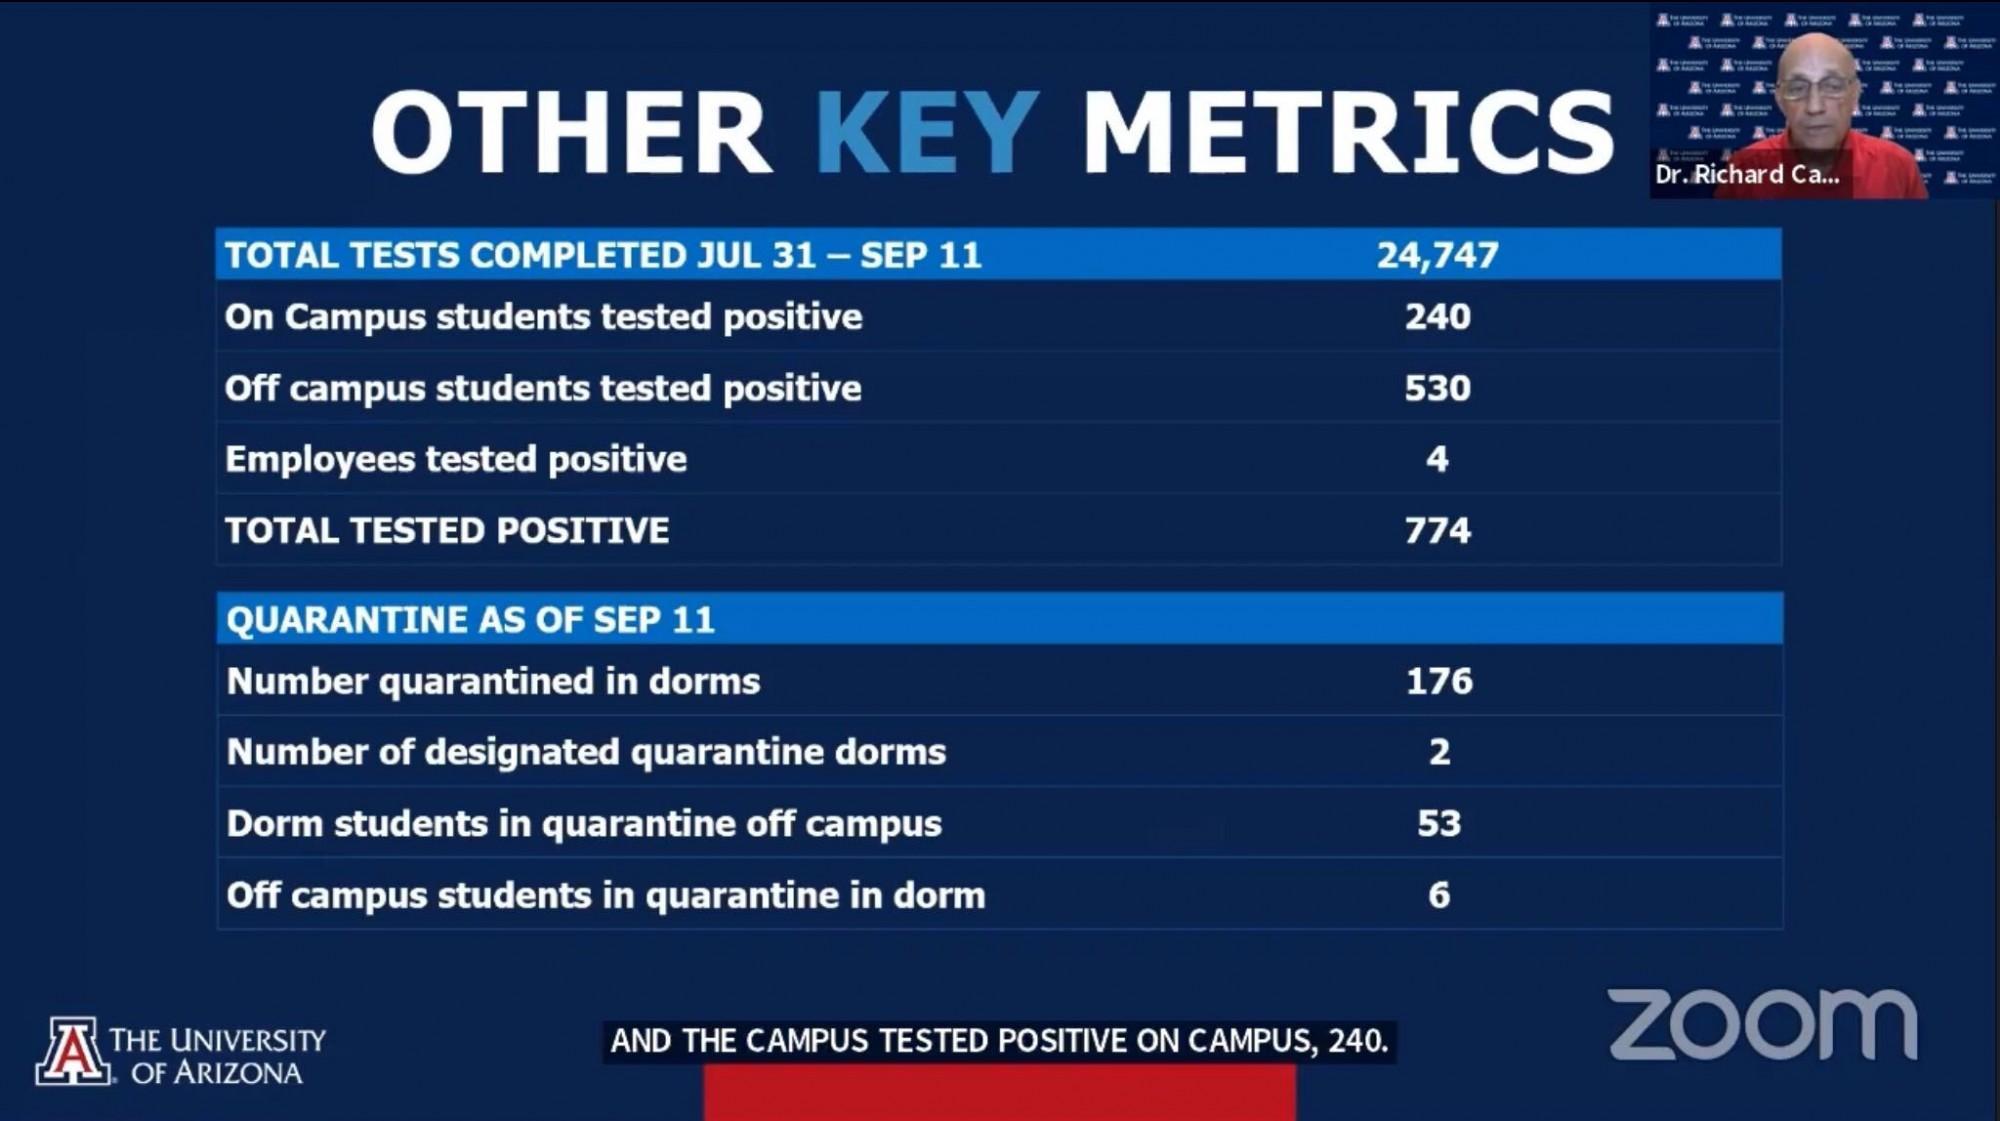 Screenshot of the key matrics presented during the Sept. 14 campus reentry task force press conference. 